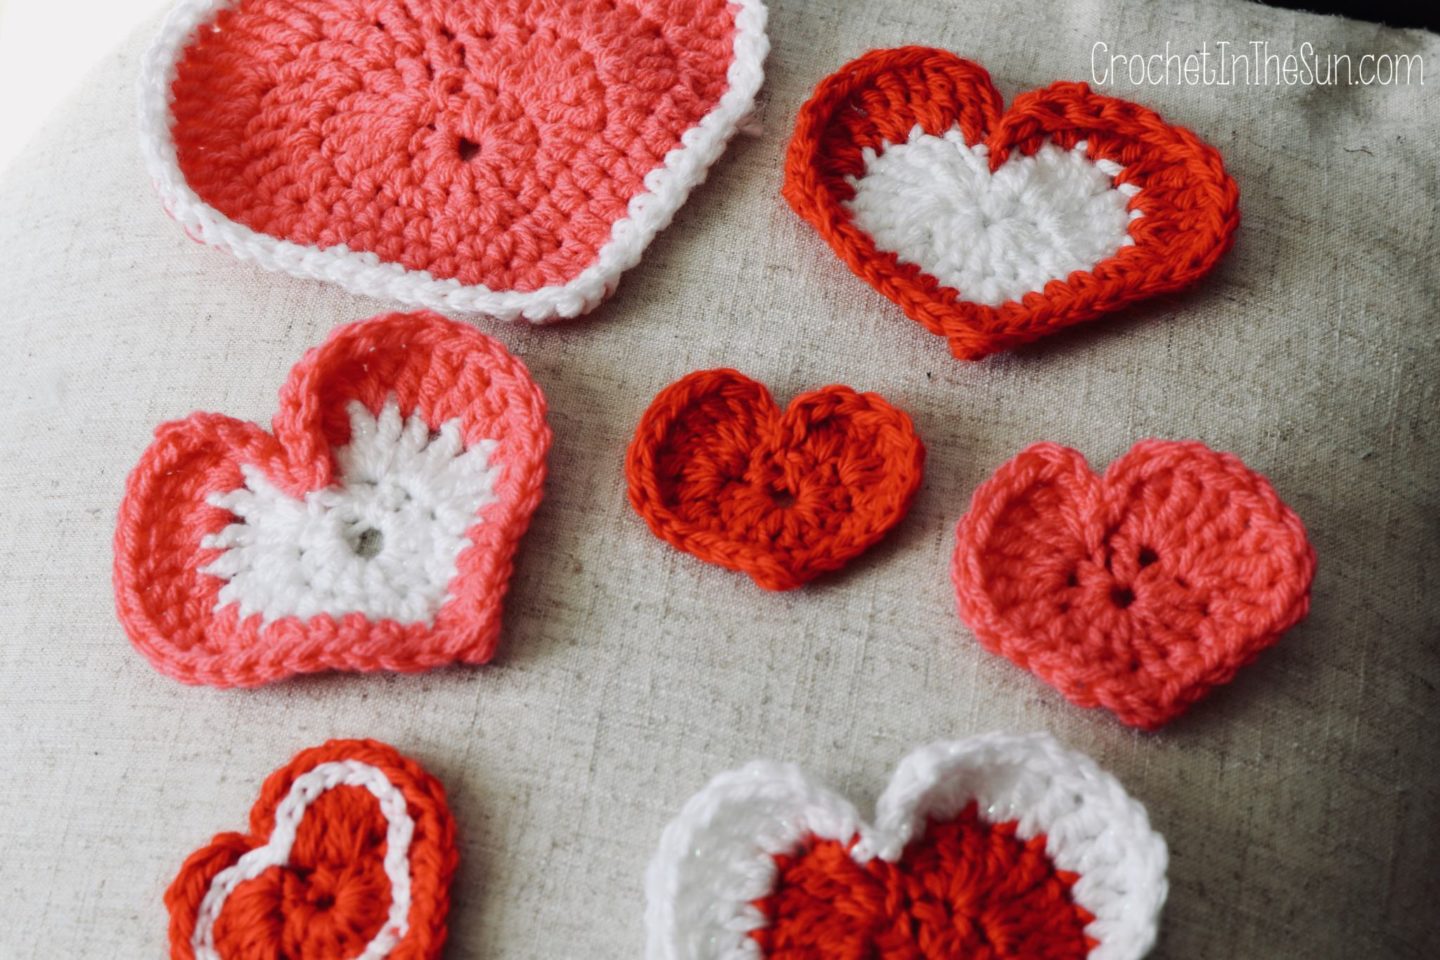 How to crochet a hearts with a border. A beginner's guide to crocheting hearts. #crochet